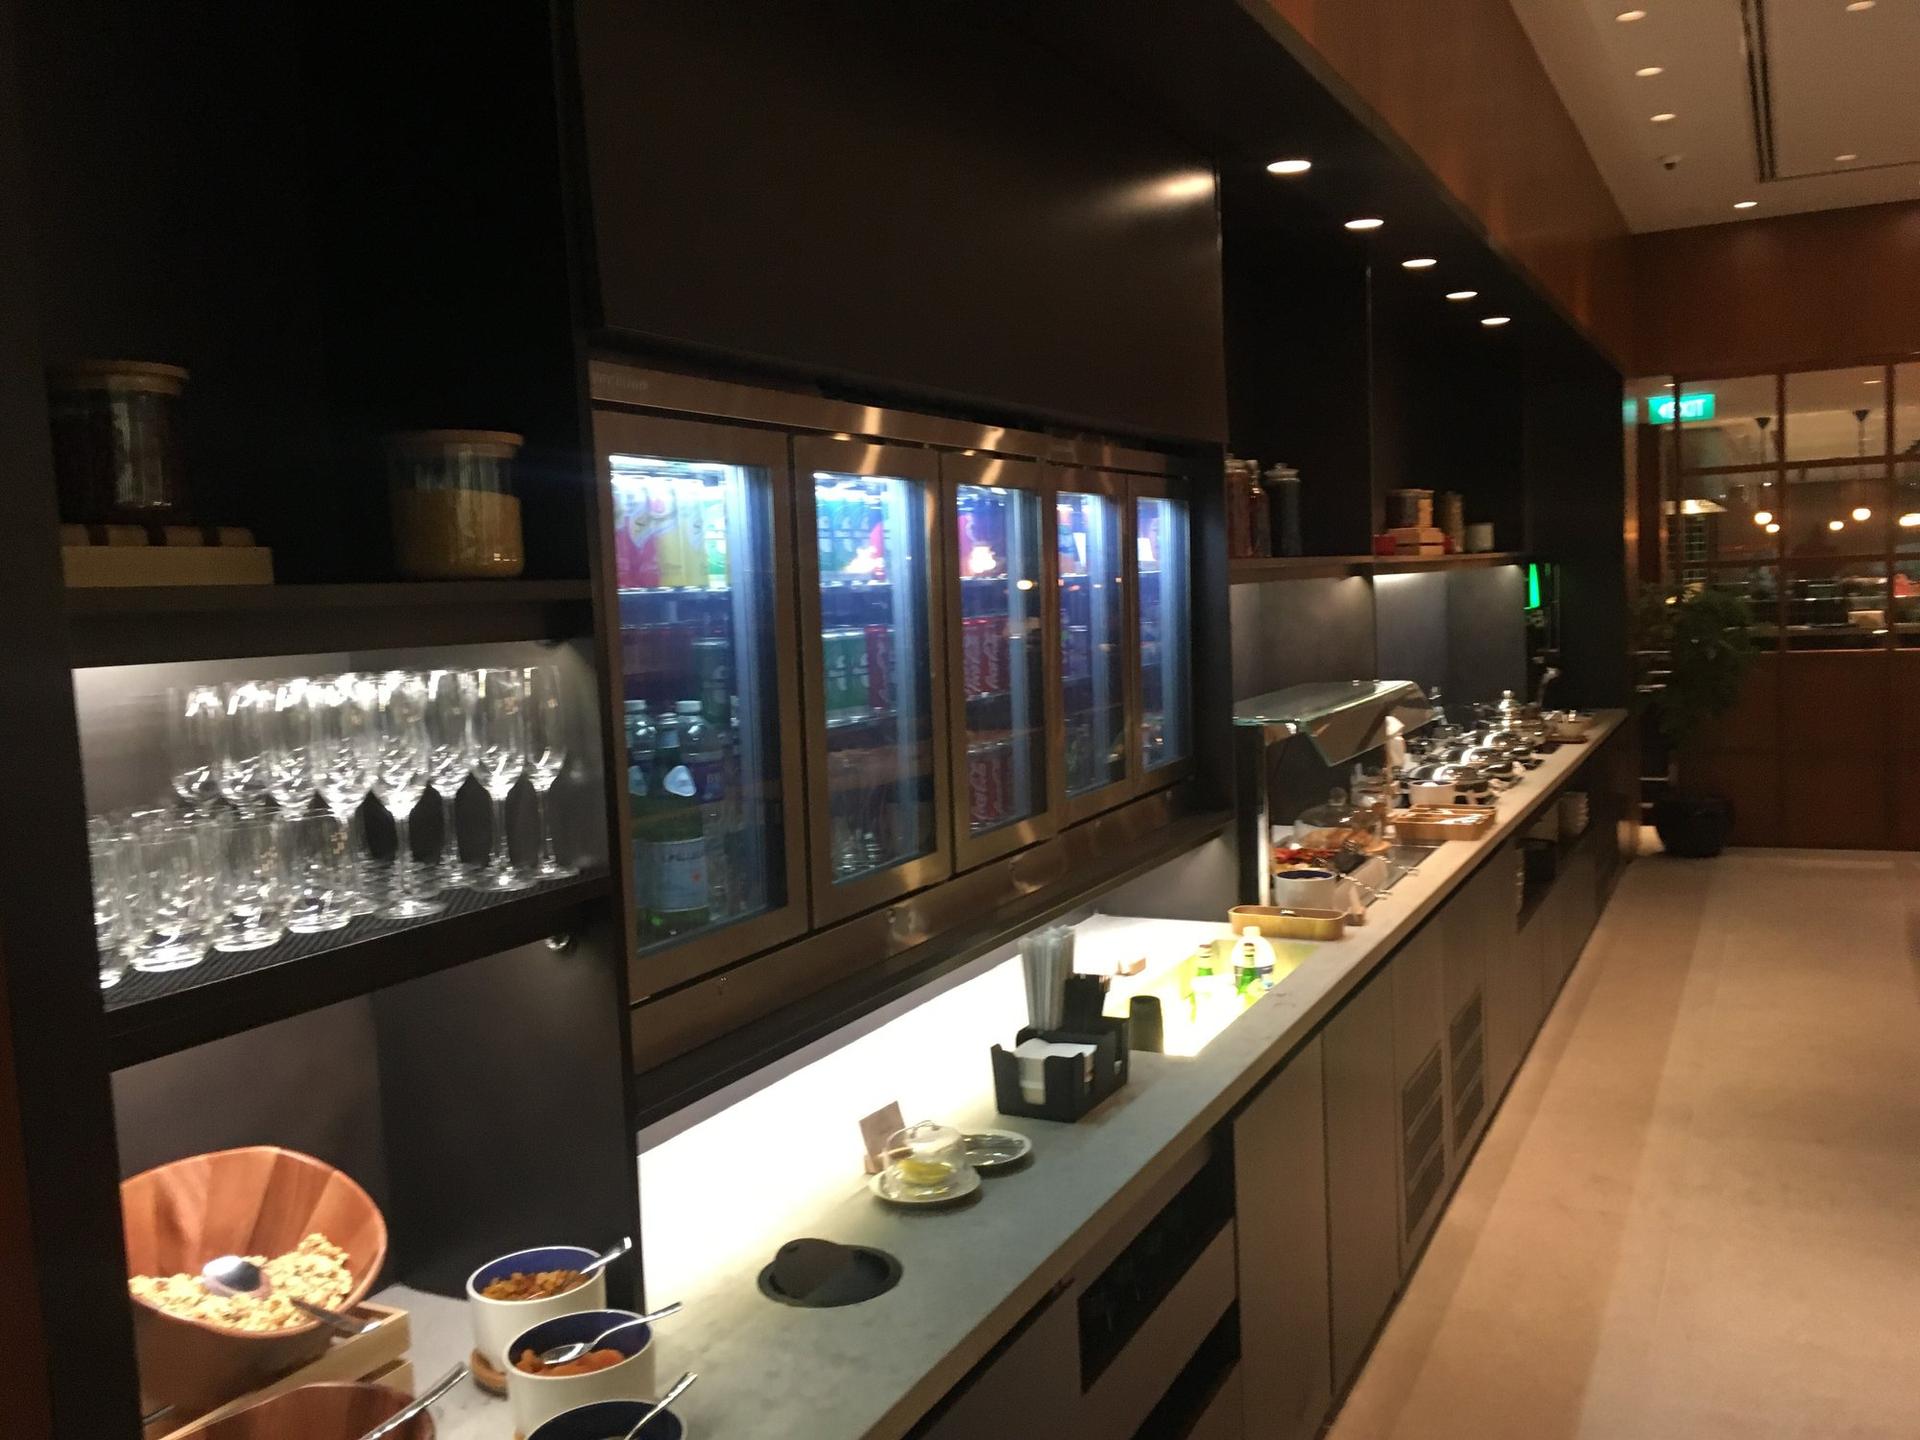 Cathay Pacific Lounge image 7 of 60